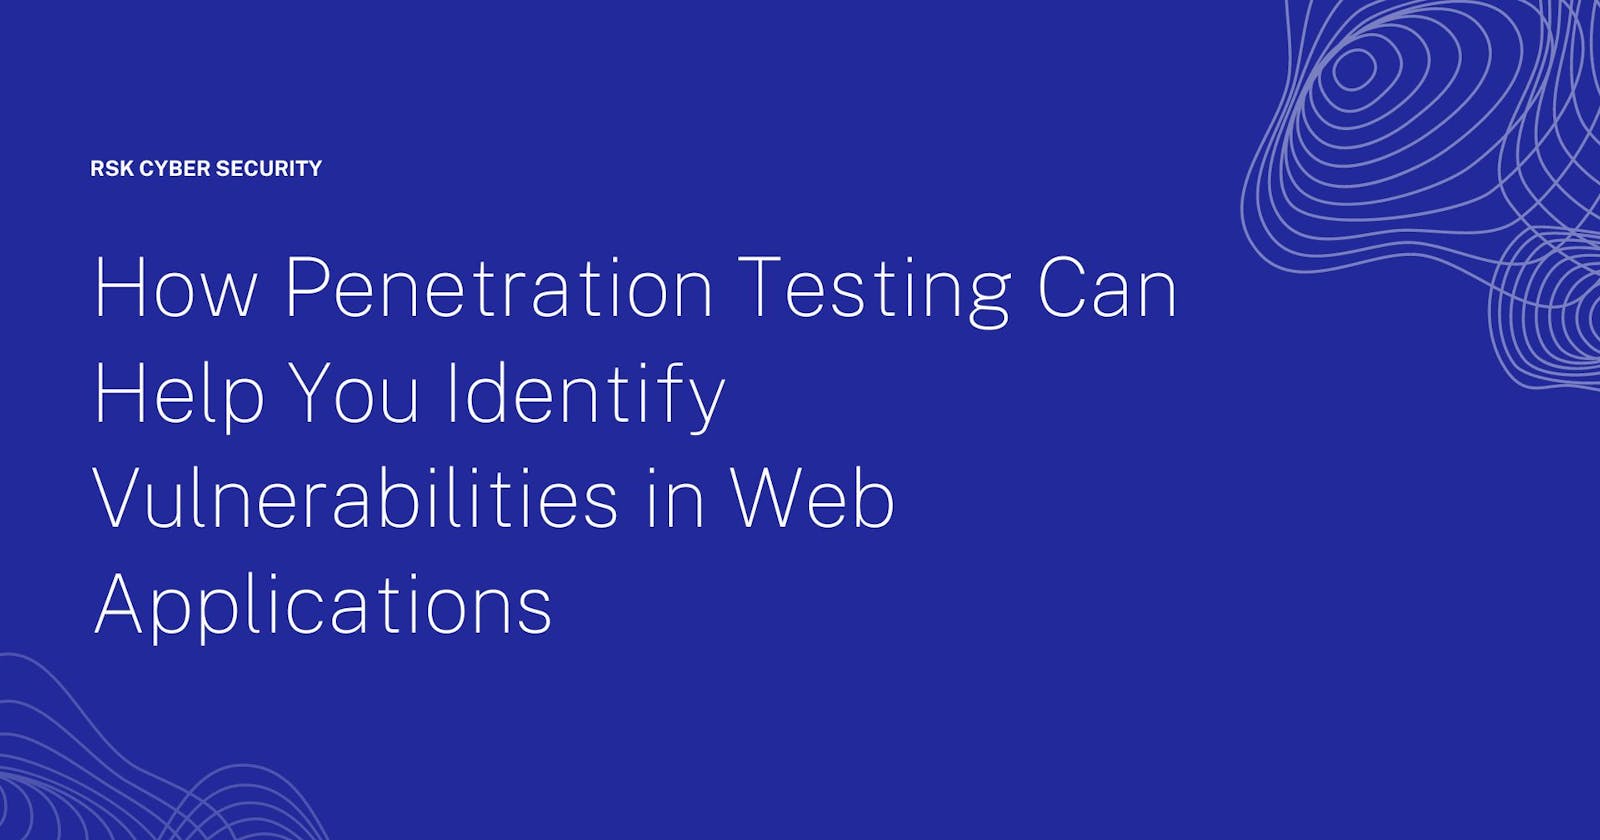 How Penetration Testing Can Help You Identify Vulnerabilities in Web Applications